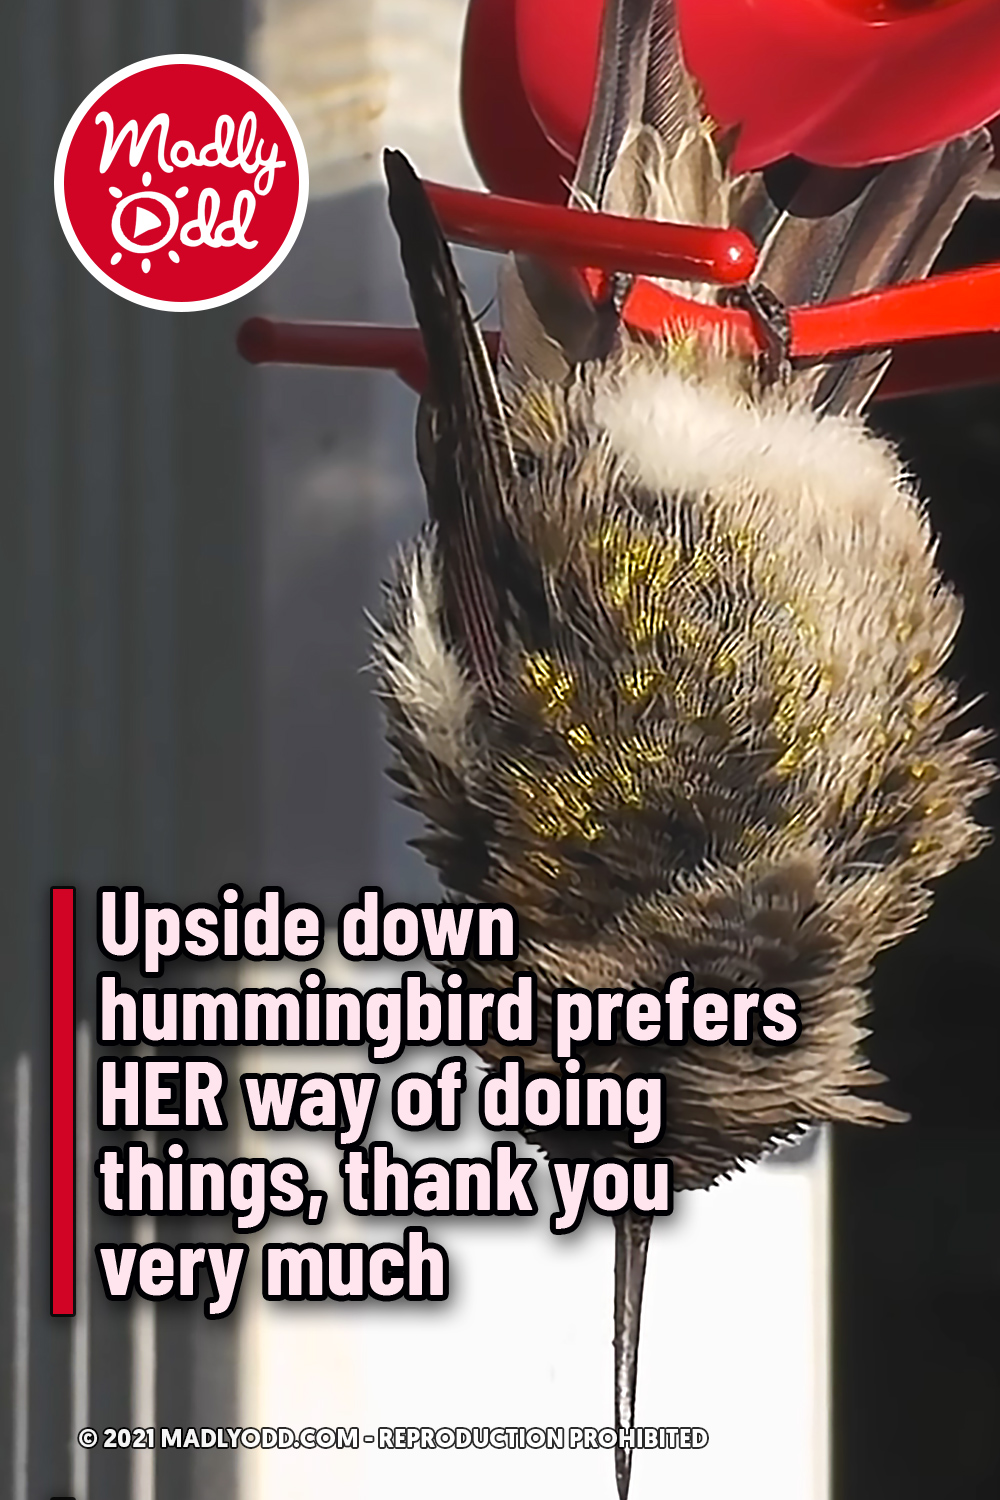 Upside down hummingbird prefers HER way of doing things, thank you very much